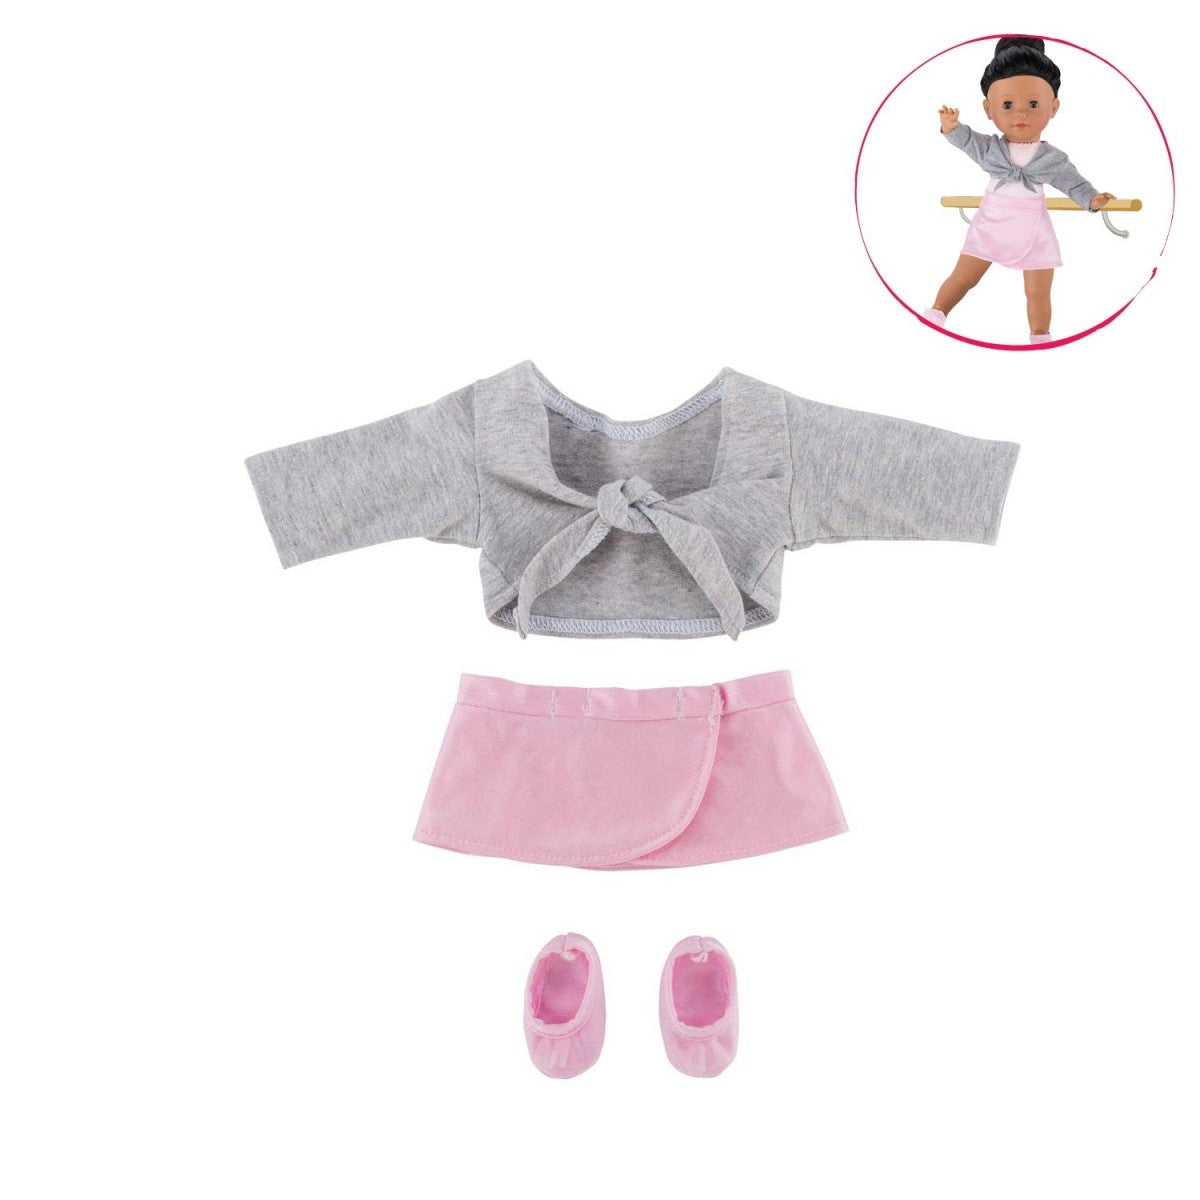 Corolle - MaCorolle - Clothing - Dance Lesson -36cm